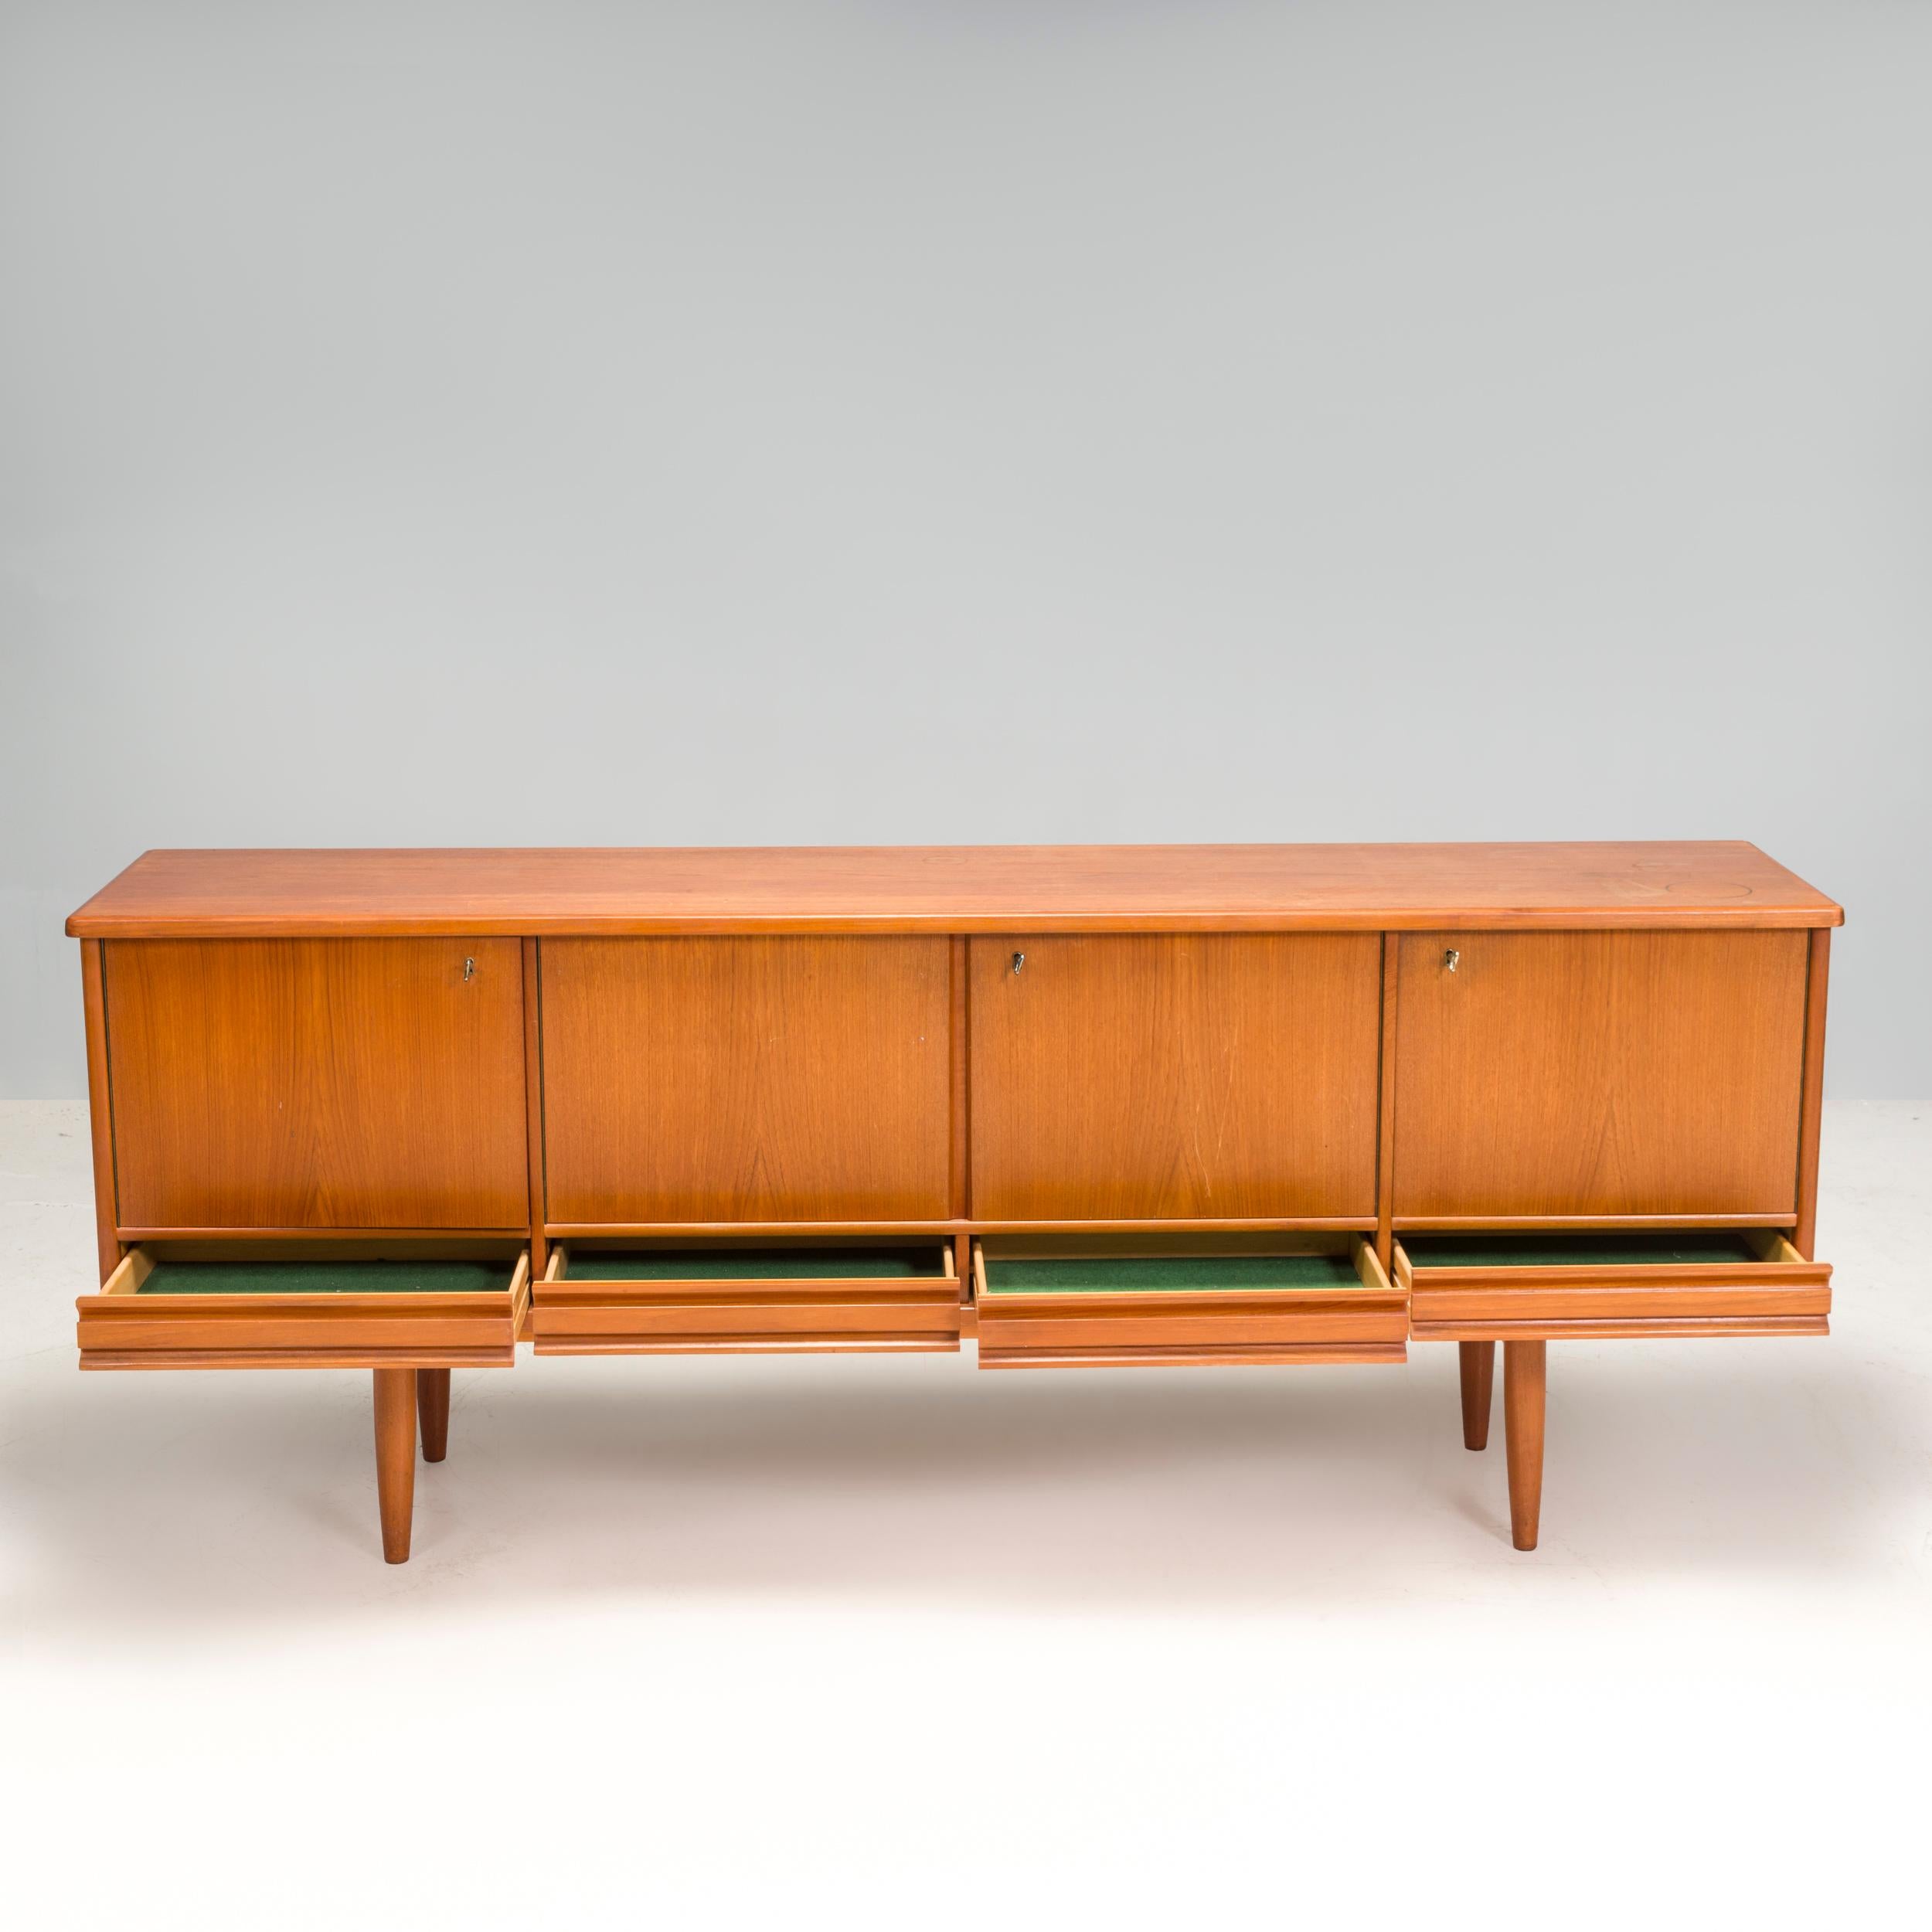 This teak sideboard comes from Norway produced by  Nordås Bruk A/S and was made around 1960s. 

We like the sleek lines of this well made teak sideboard with all the drawers hidden inside the cupboard doors . It features three storage sections,